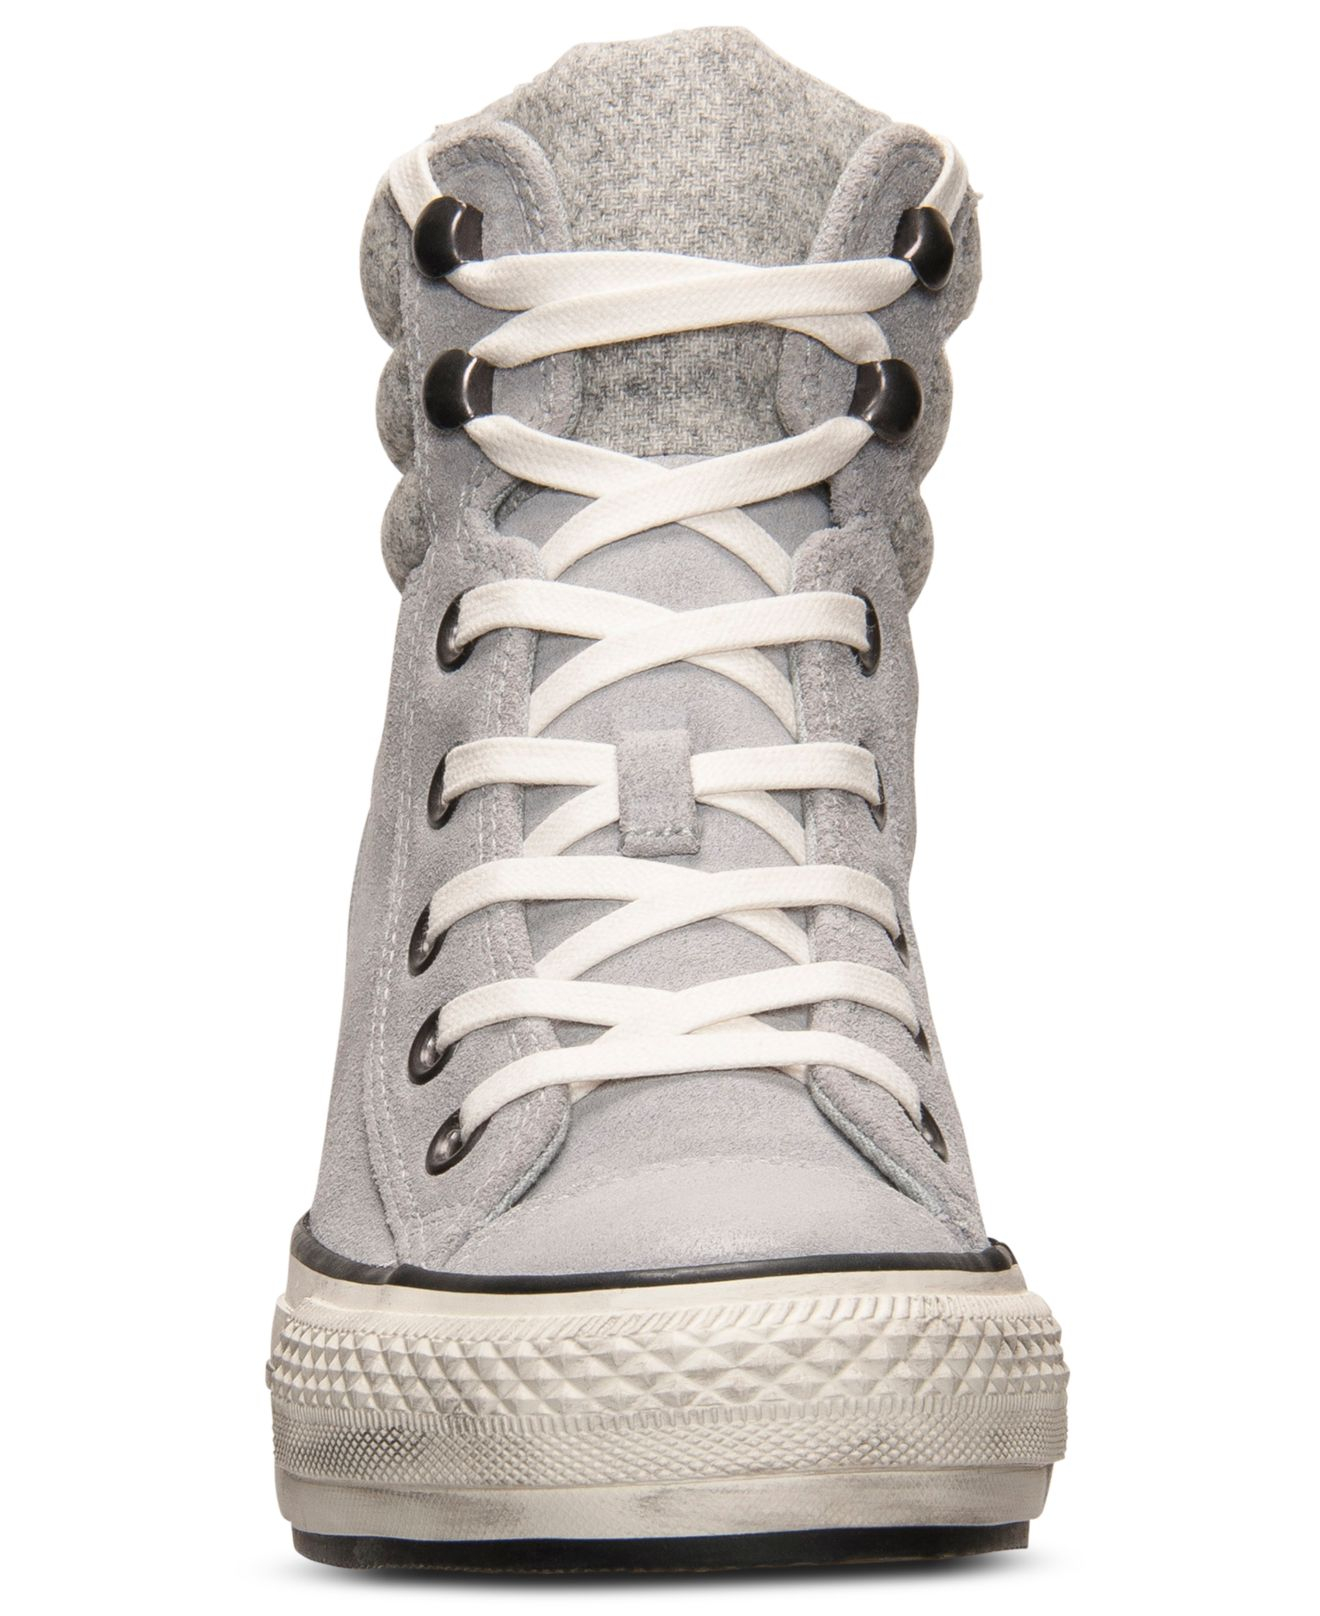 Converse Women'S Chuck Taylor All Star Platform Plus Hi Casual Sneakers  From Finish Line in Gray - Lyst